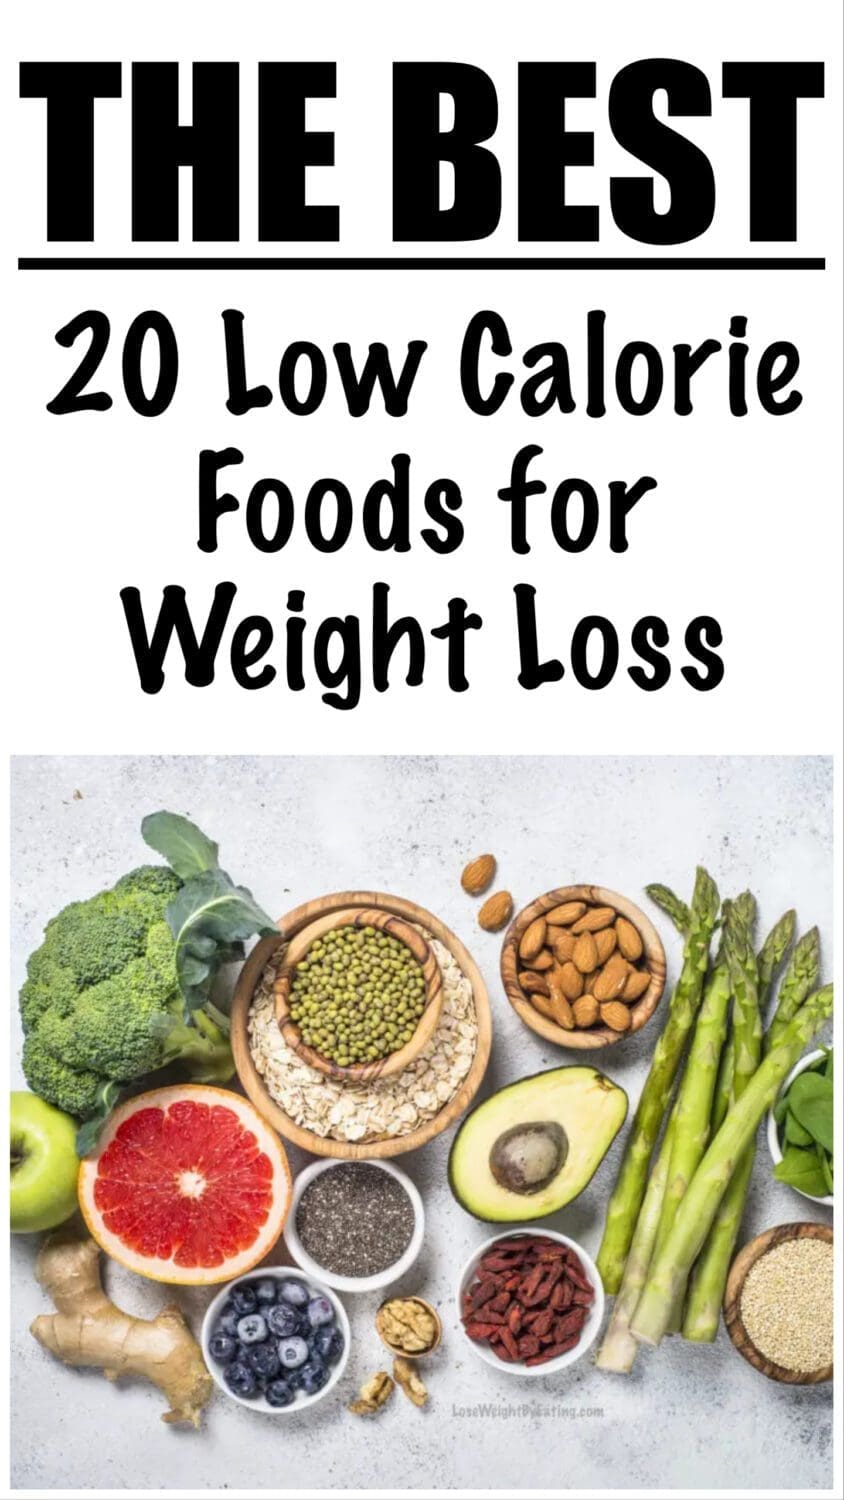 20 Low Calorie Foods for Weight Loss